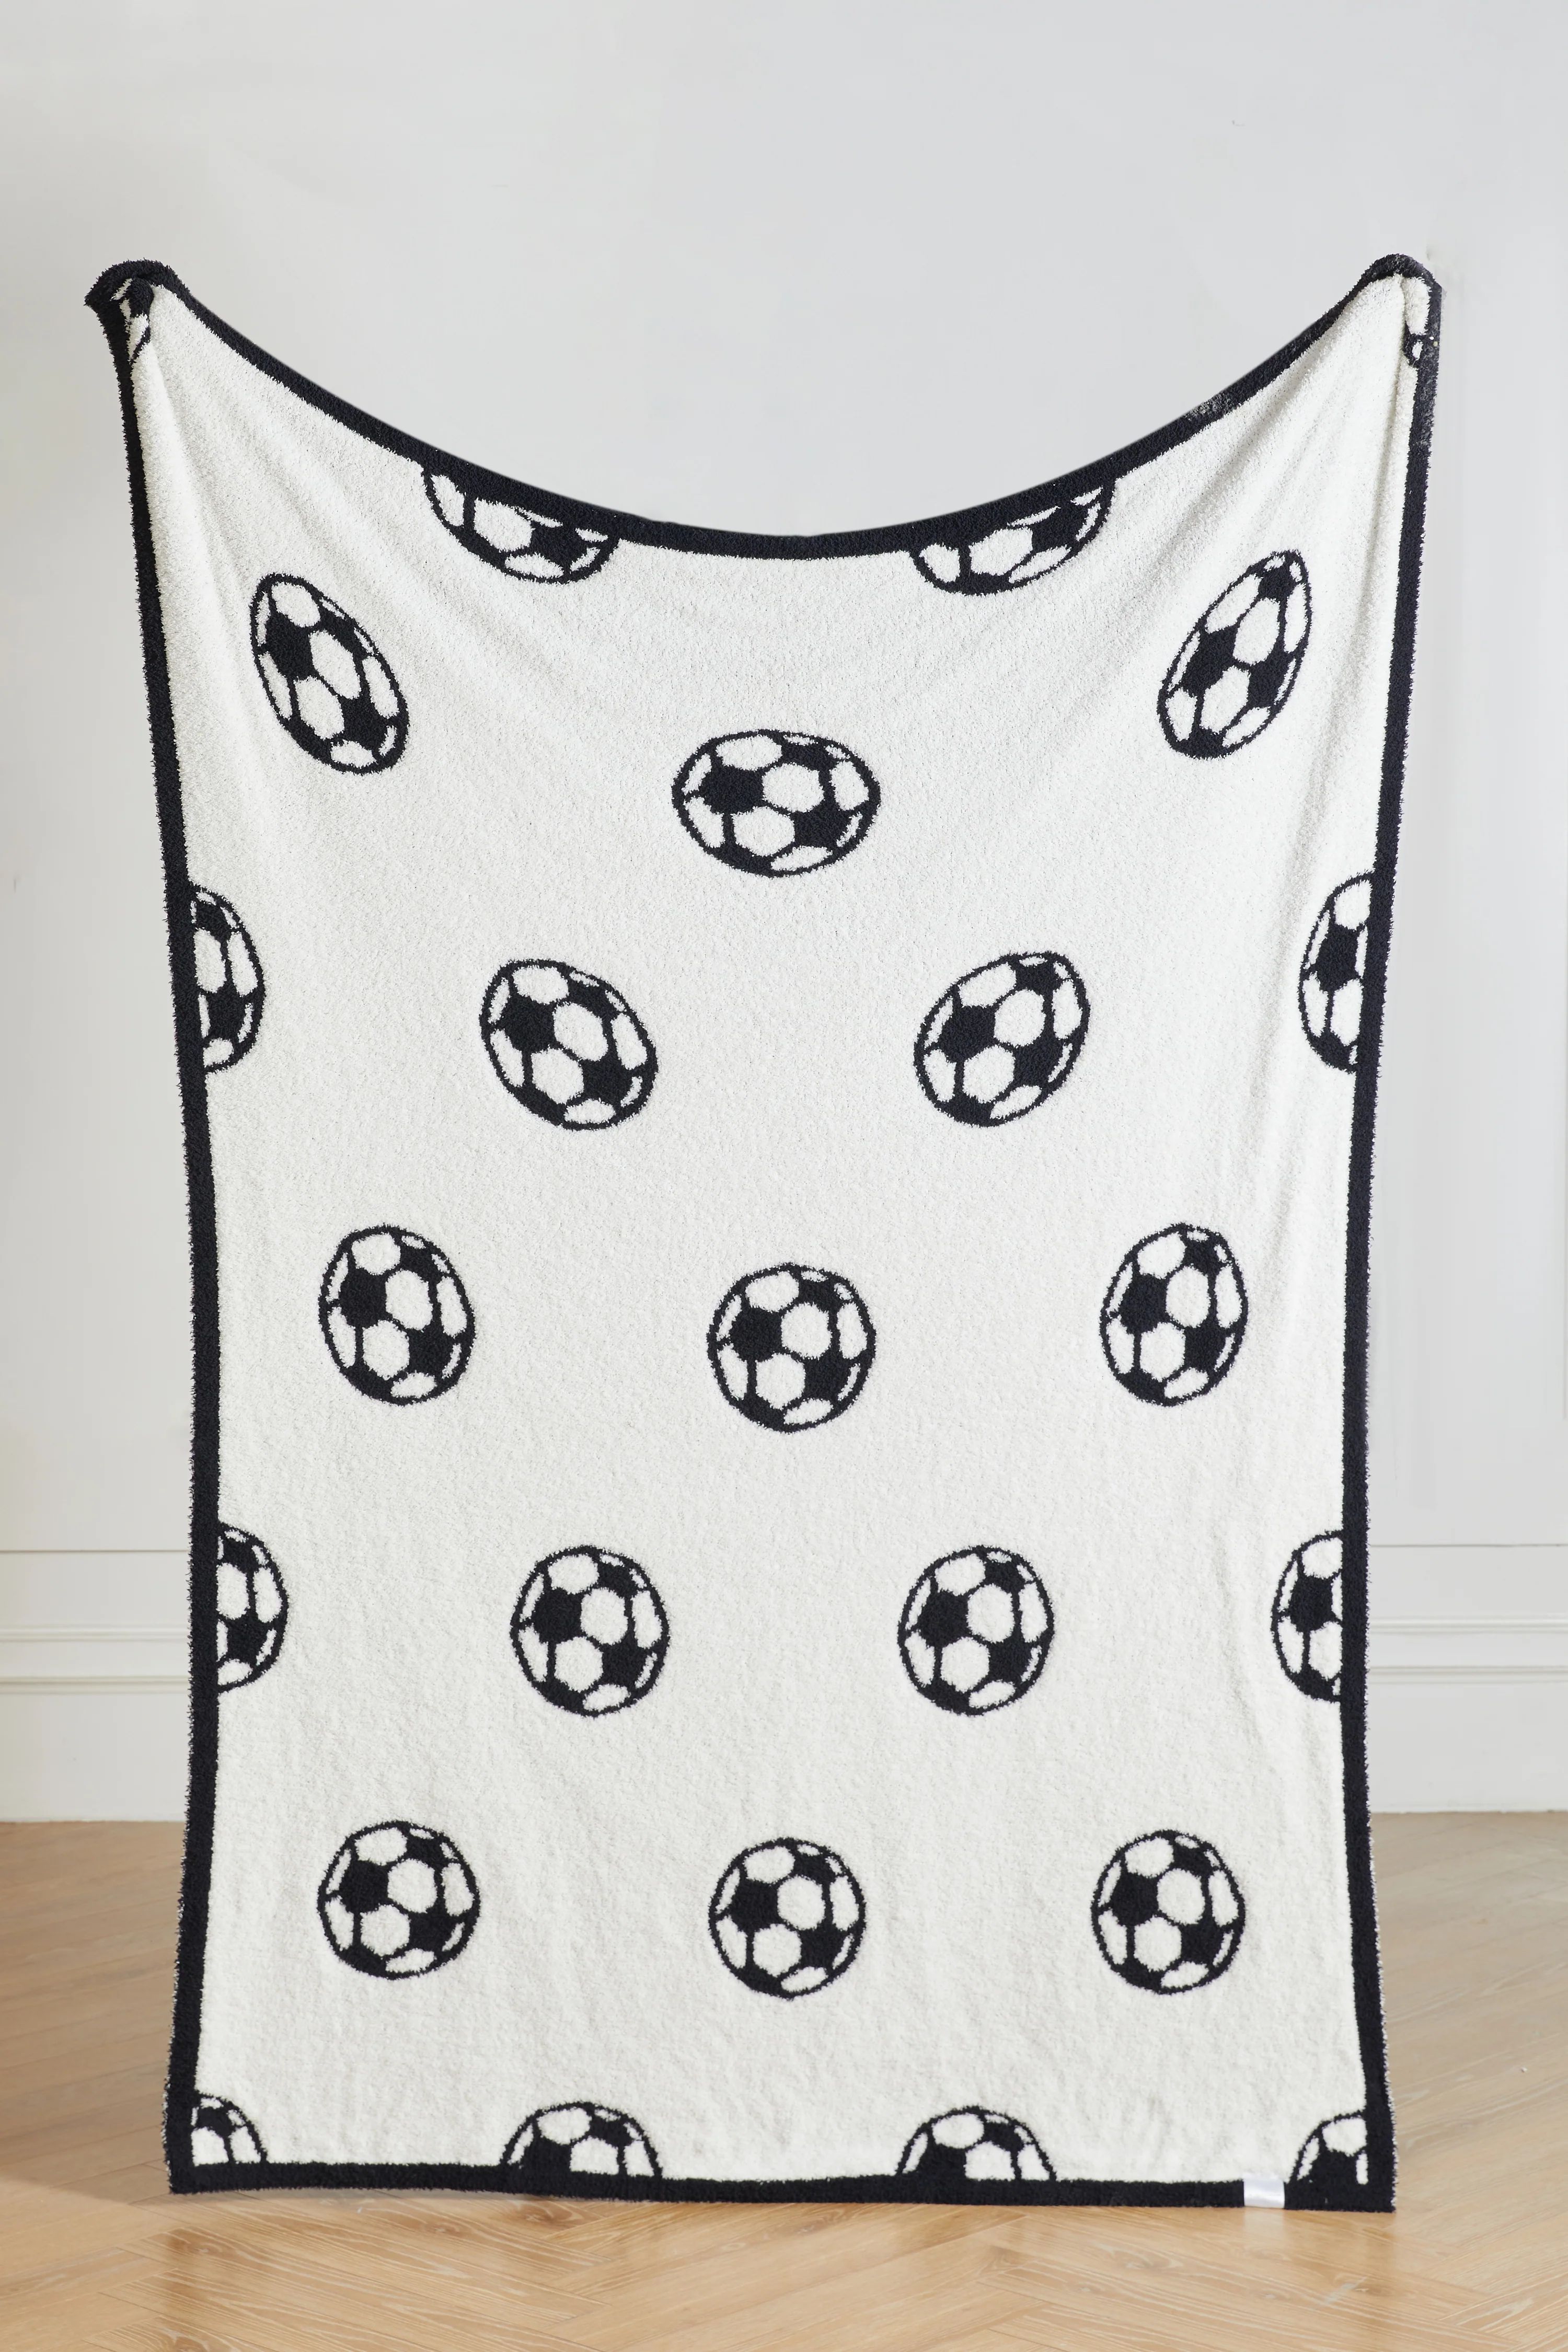 Soccer Buttery Blanket | The Styled Collection